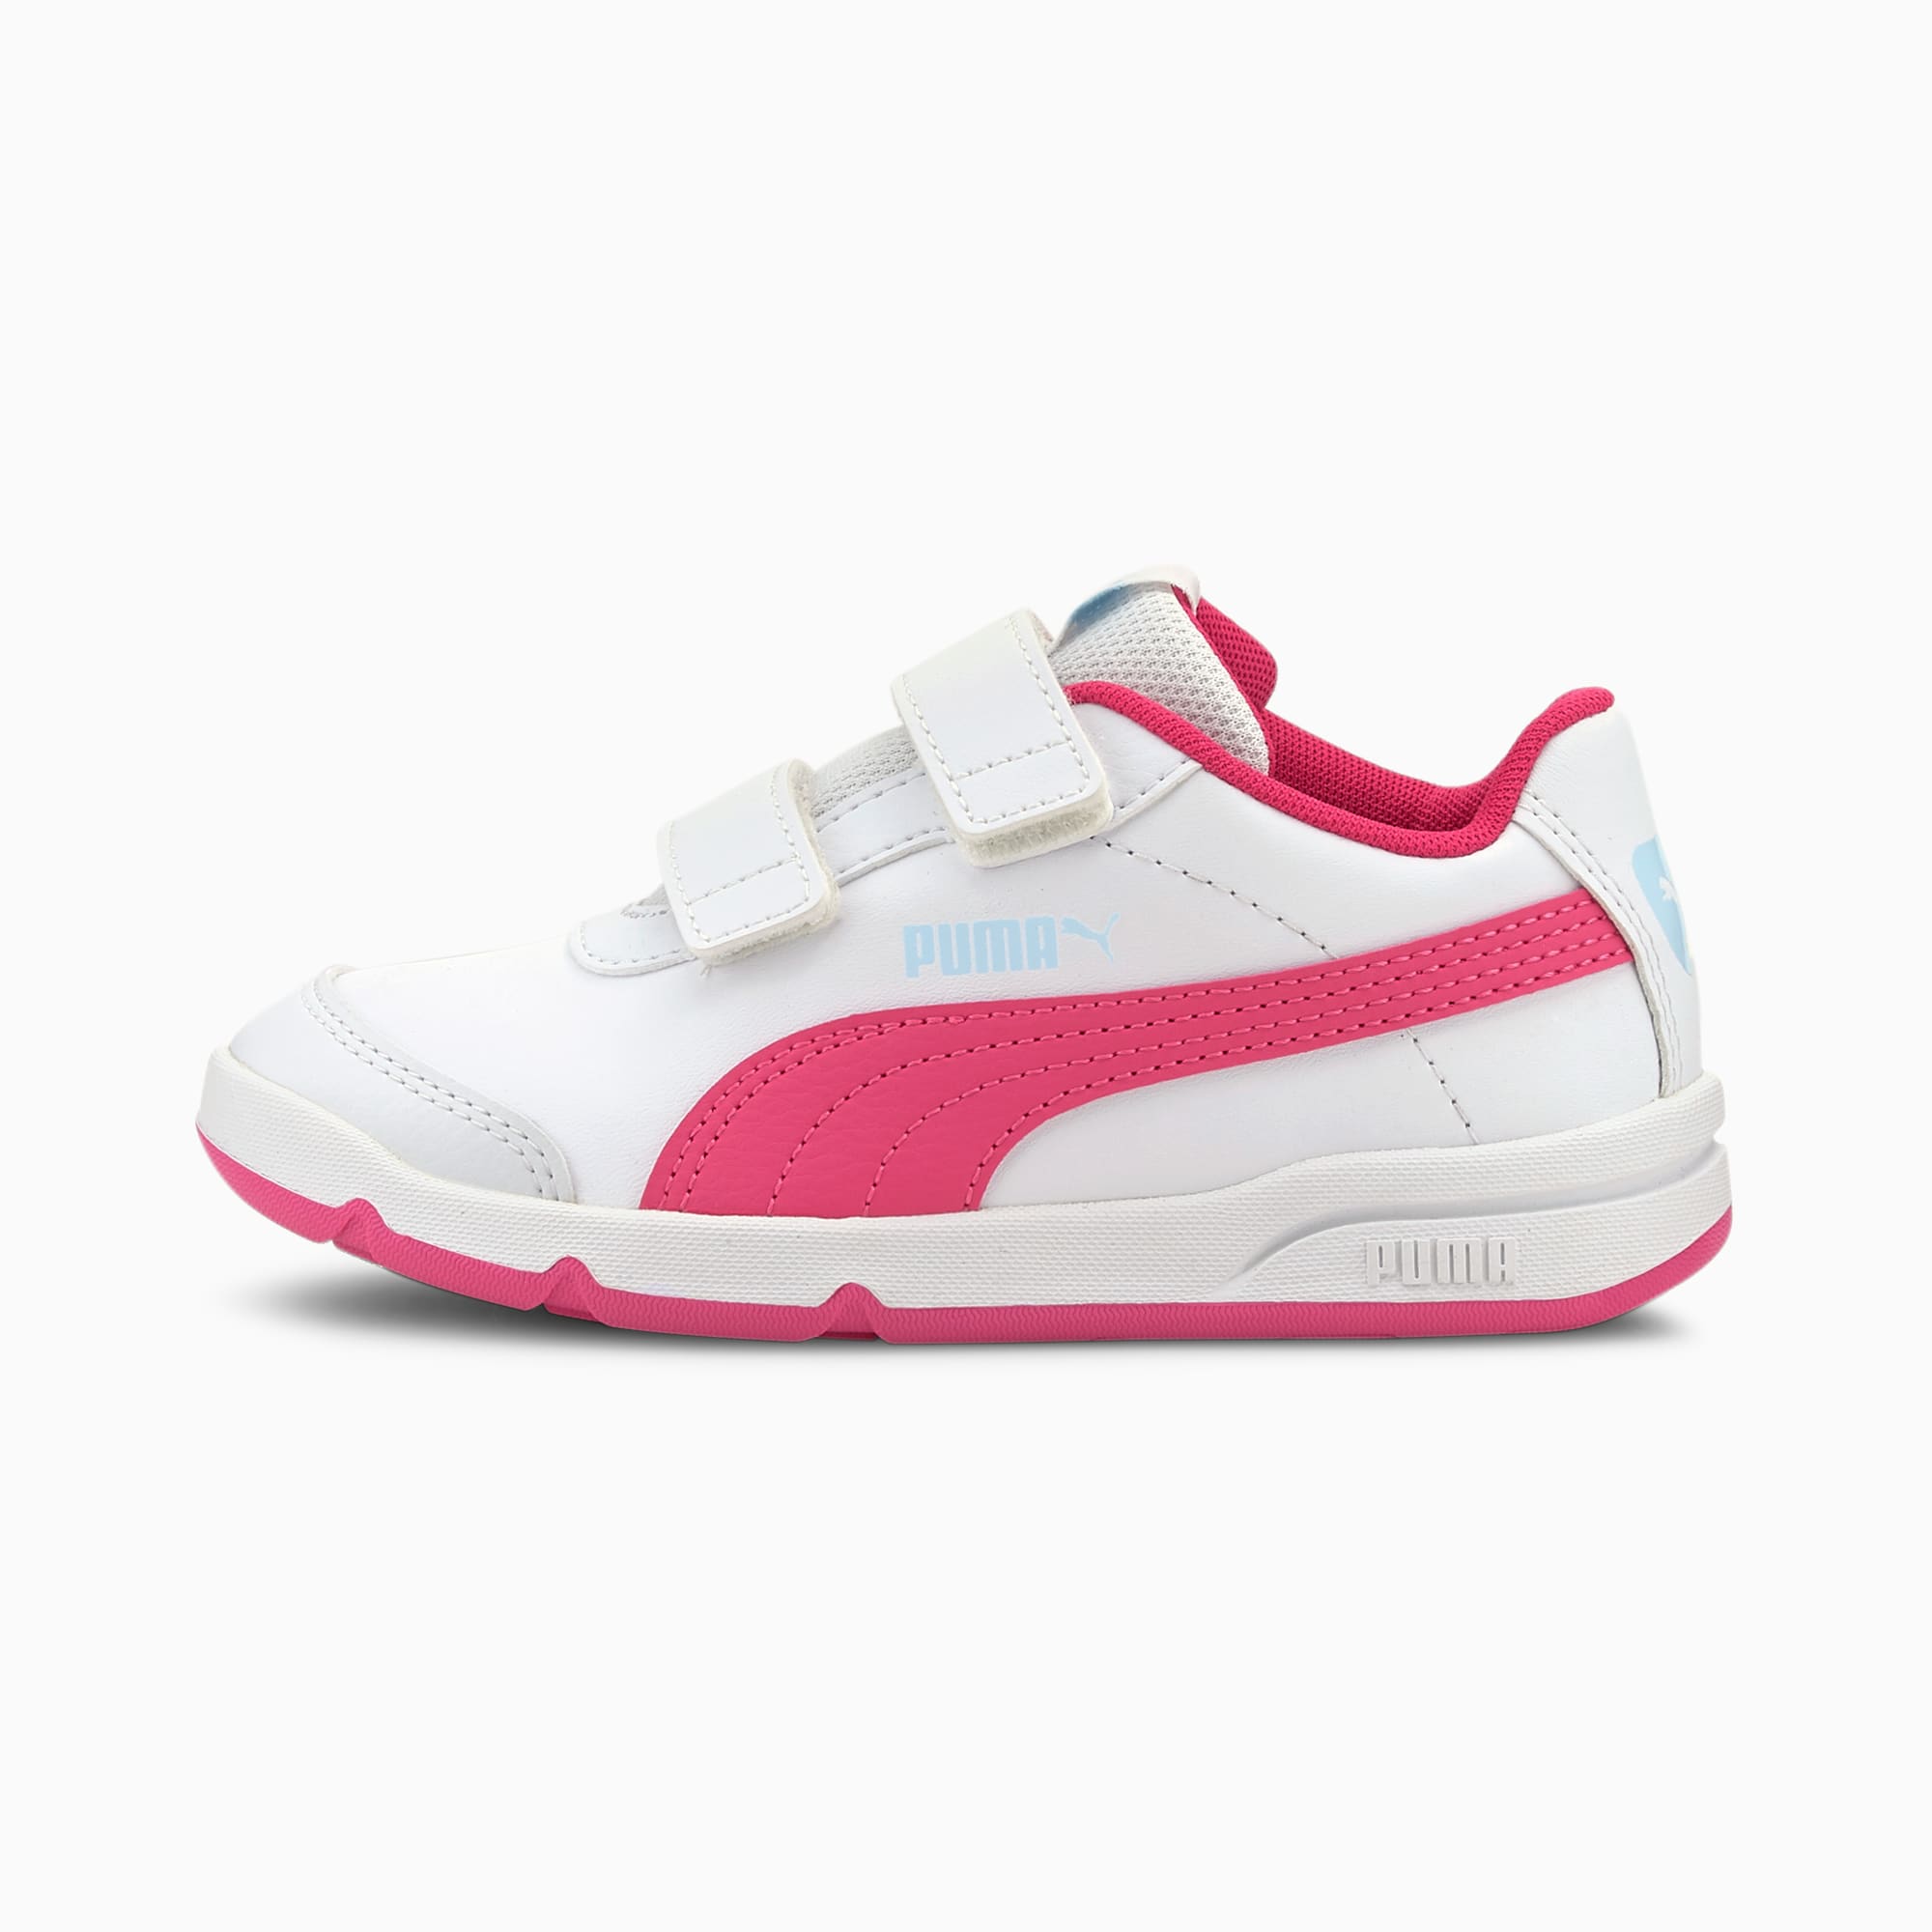 white trainers with pink back